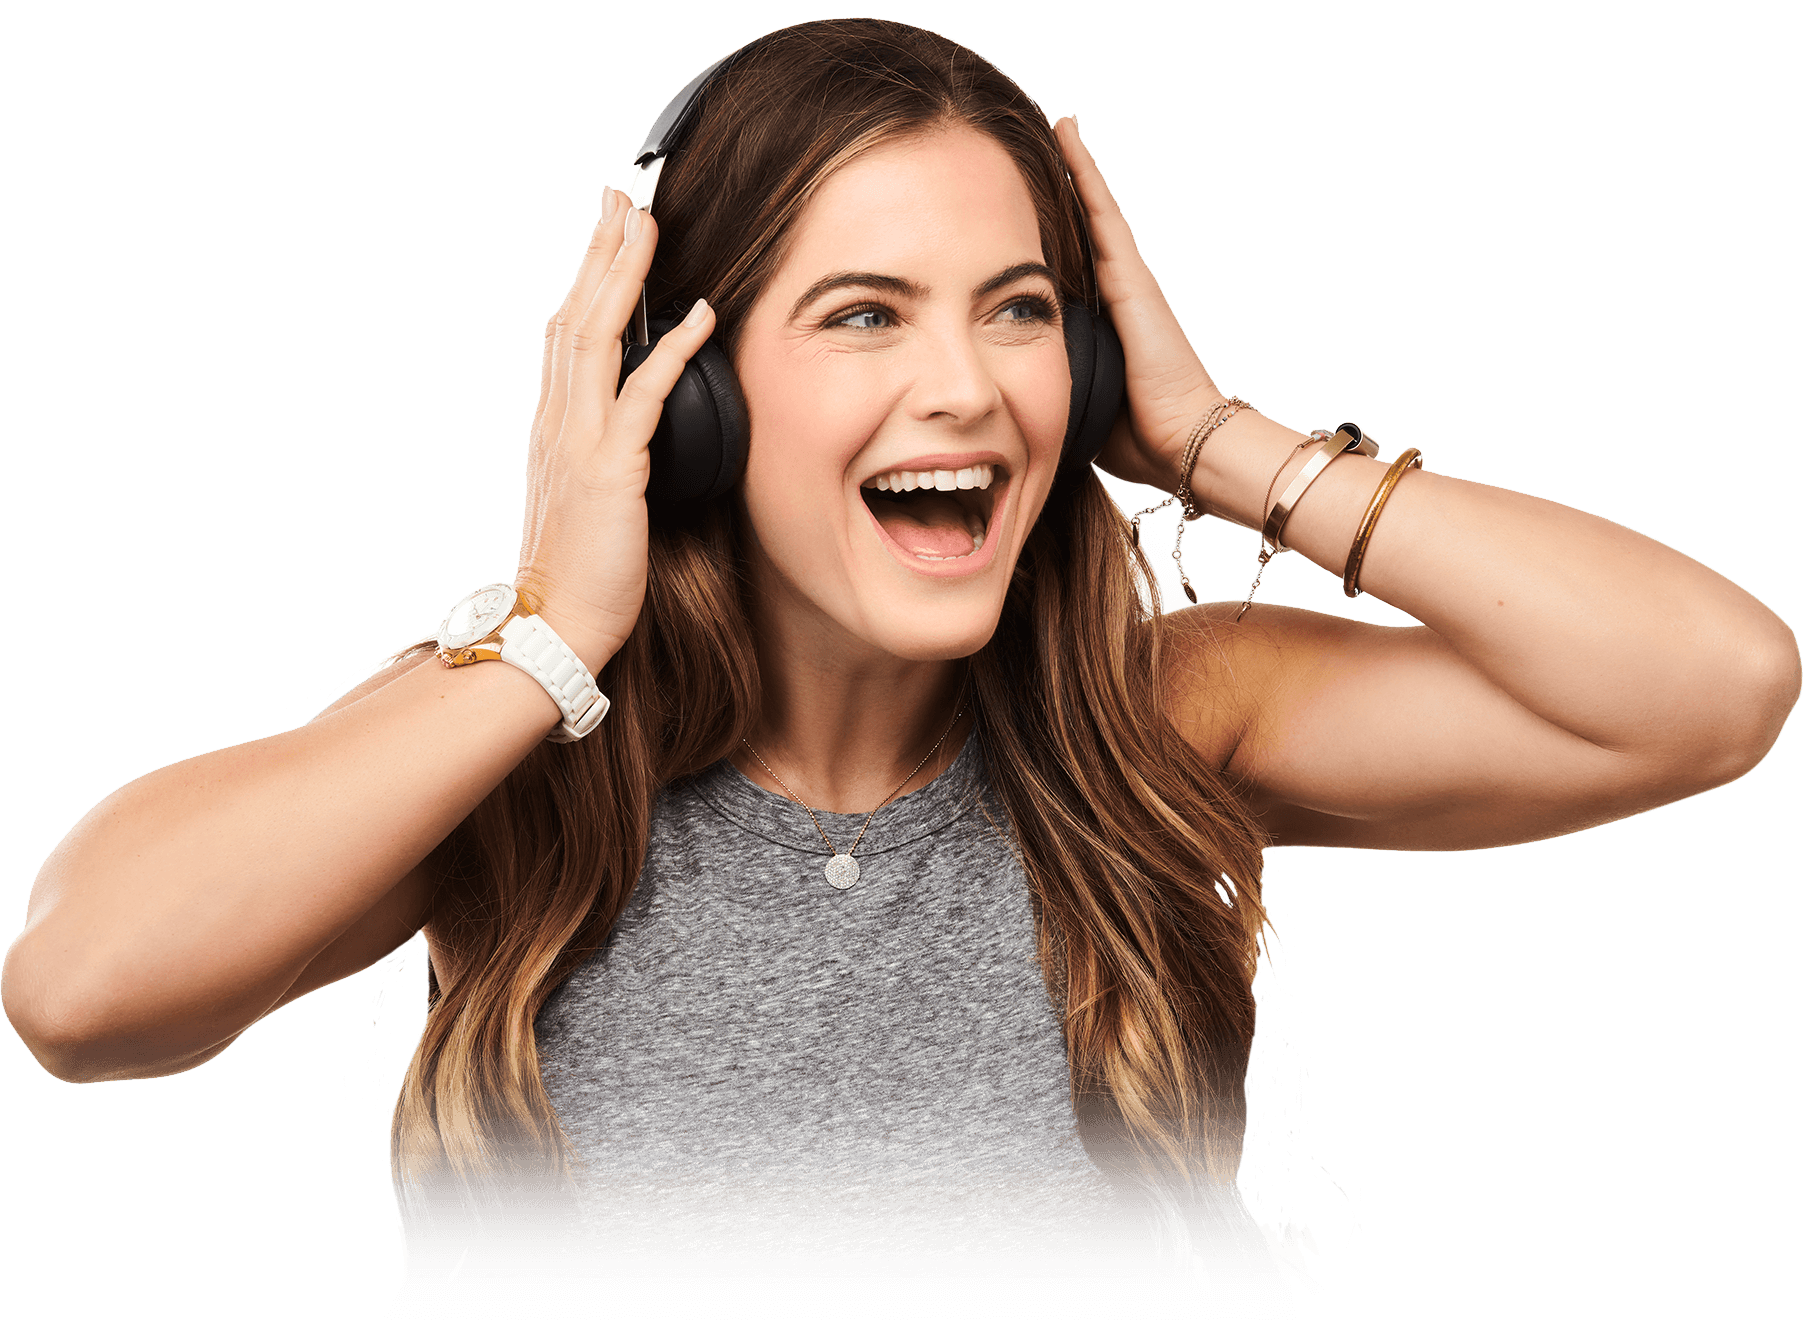 A young woman smiling as she listens to music through headphones